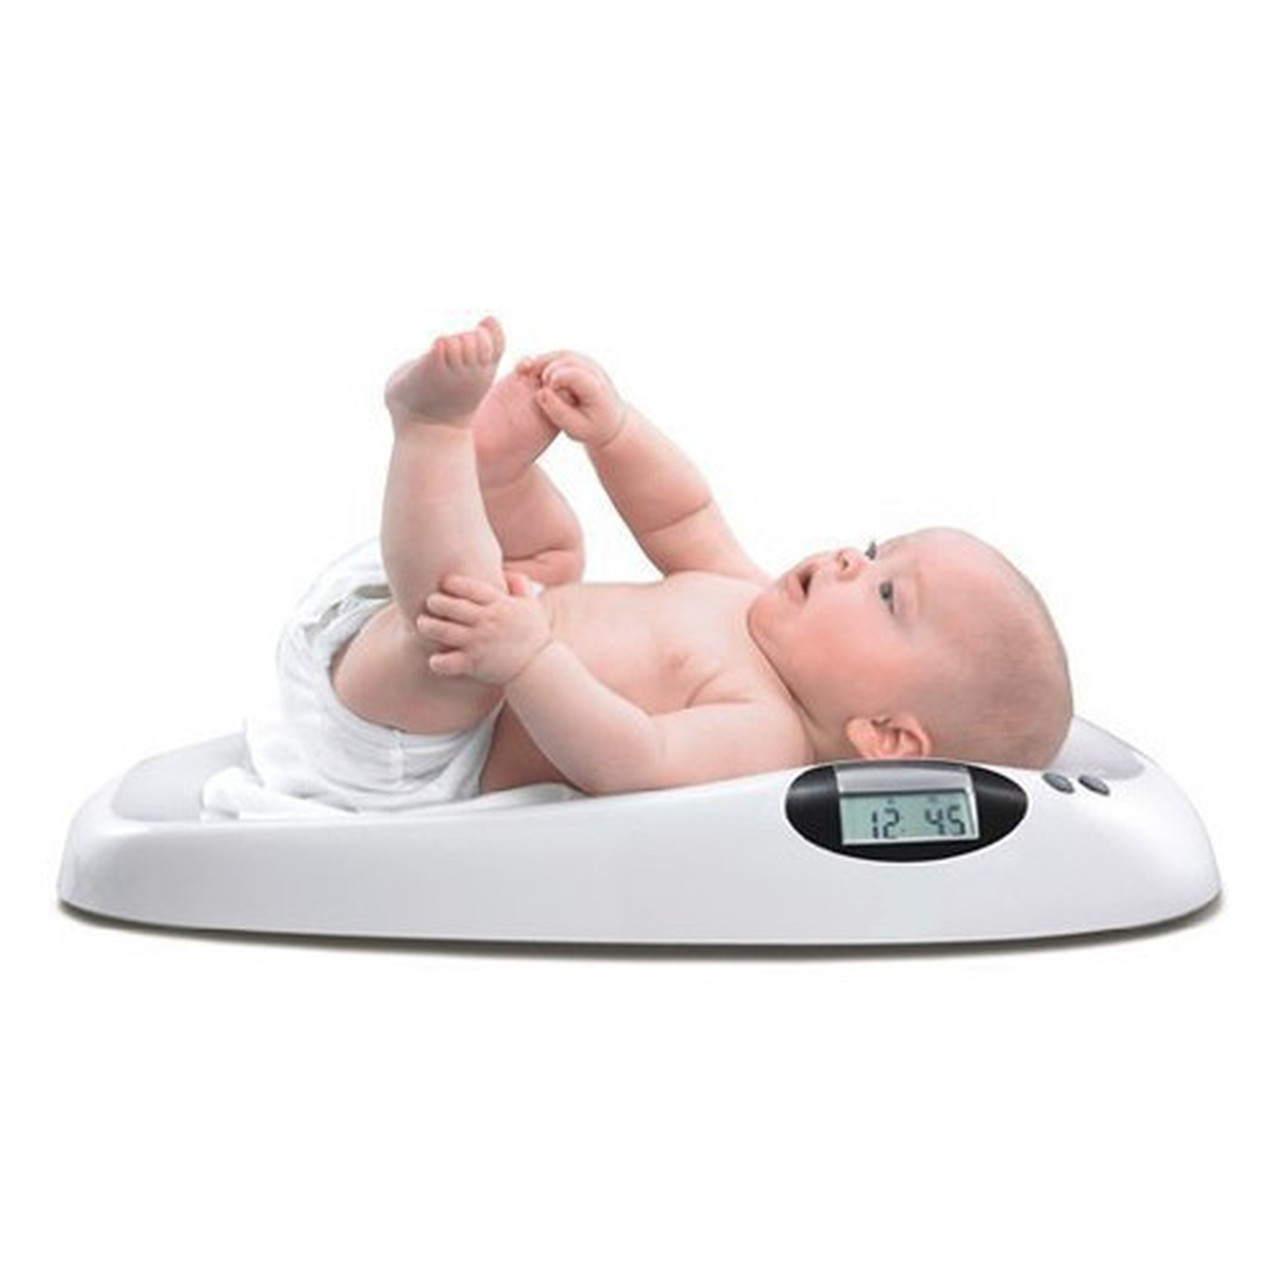 Digital Scale for Infants and Pets - Babies Getaway